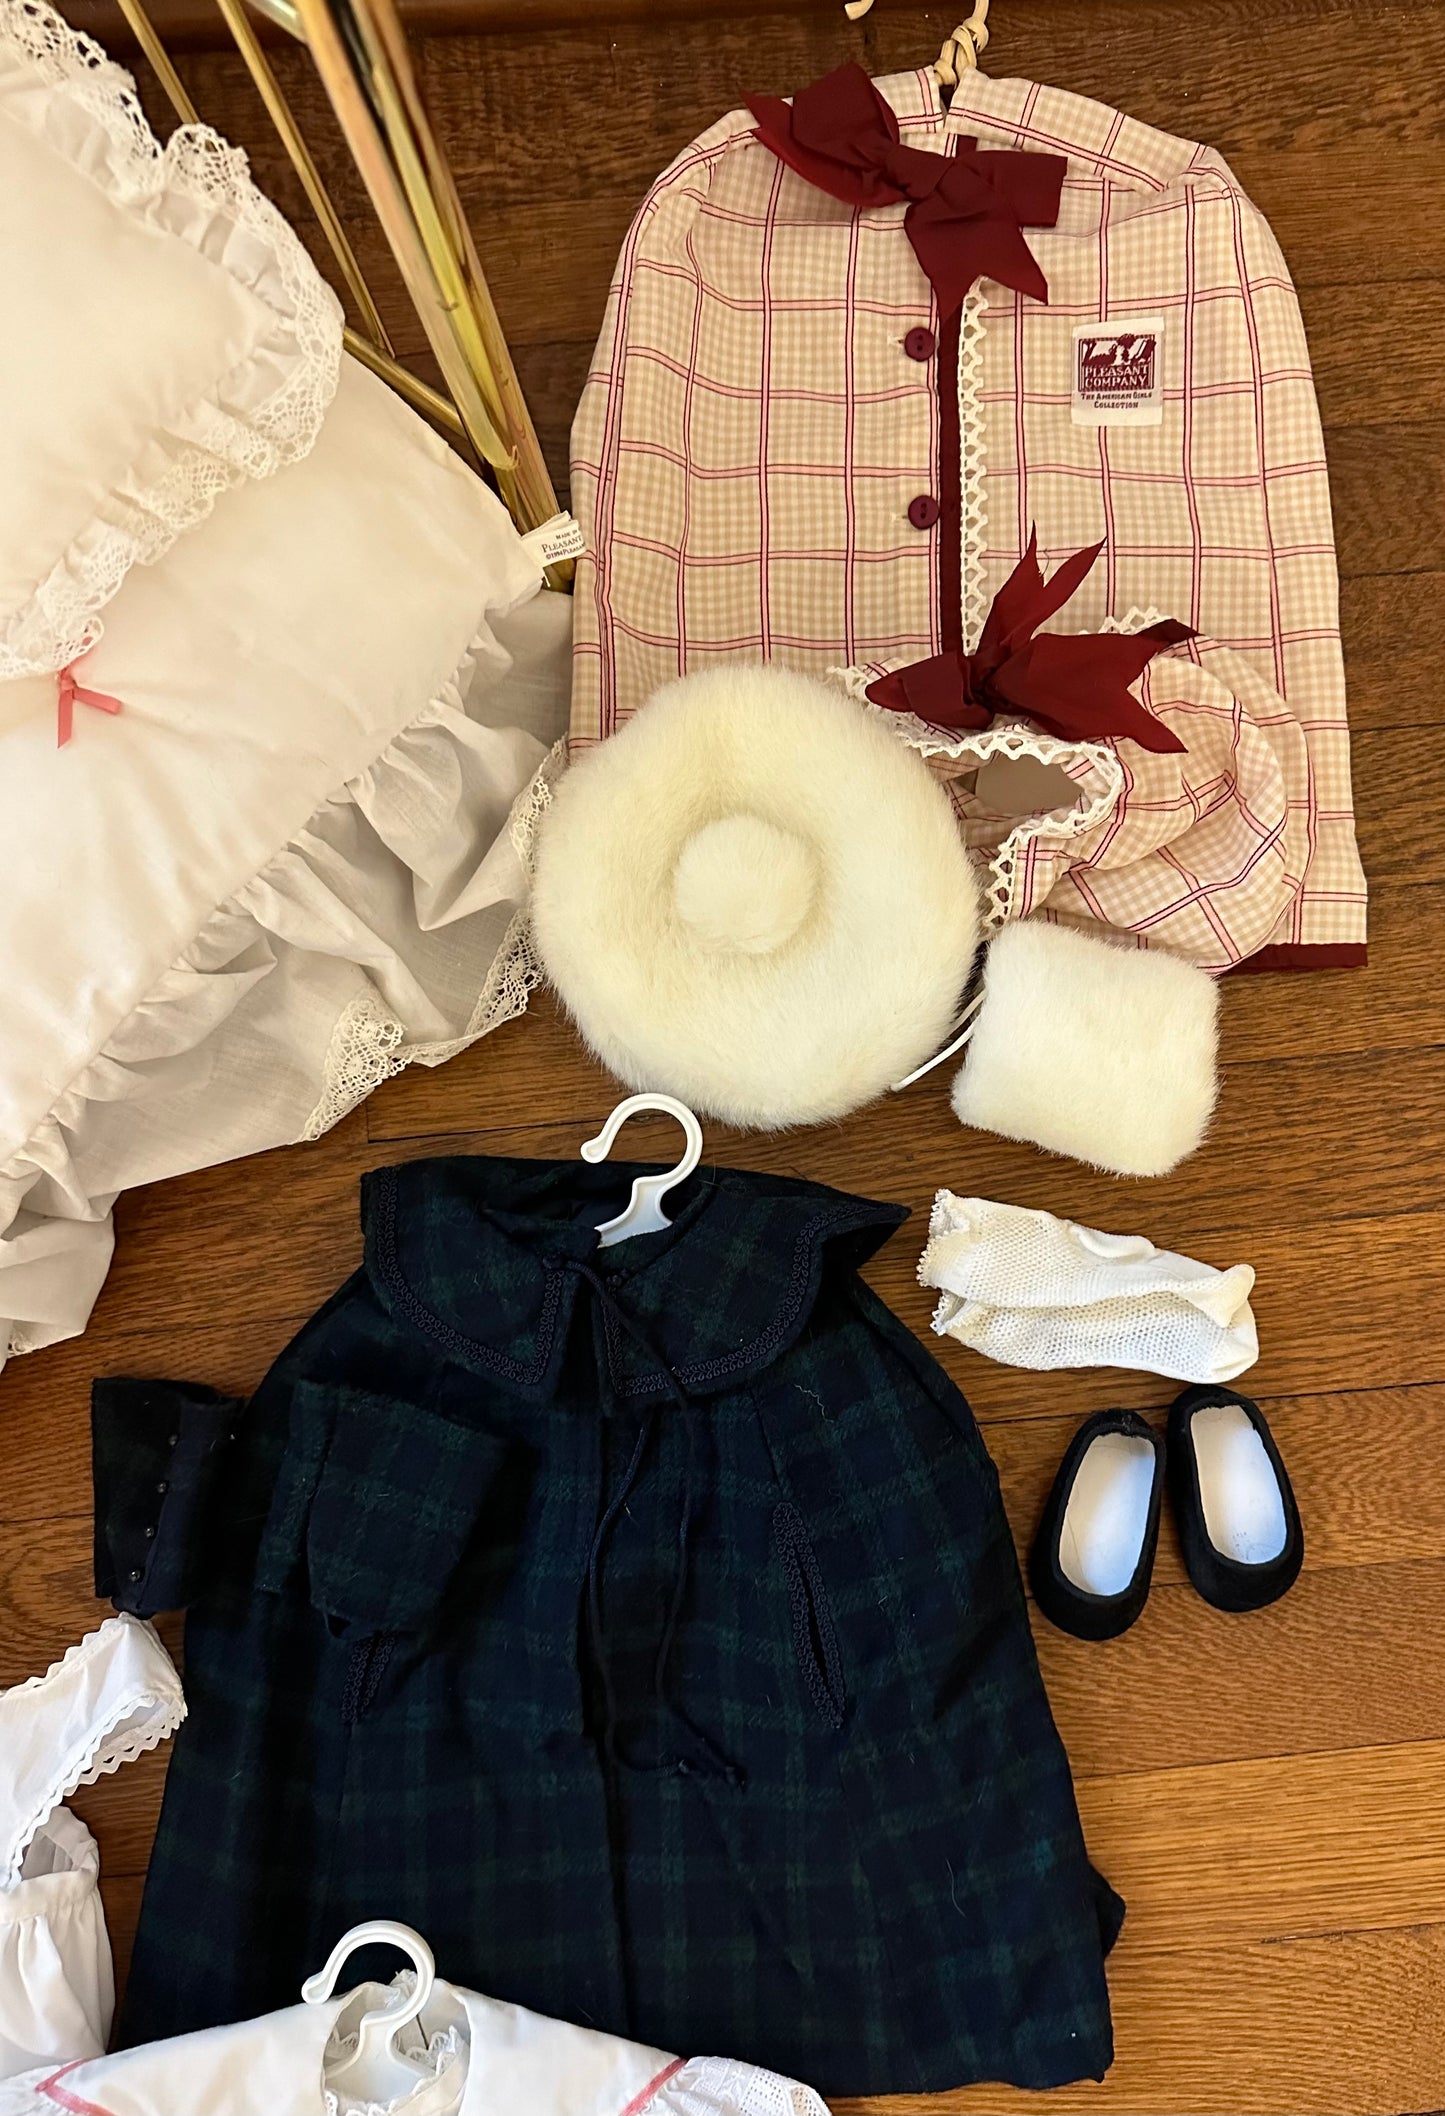 American Girl Doll Samantha+Bed+Clothing+Accessories